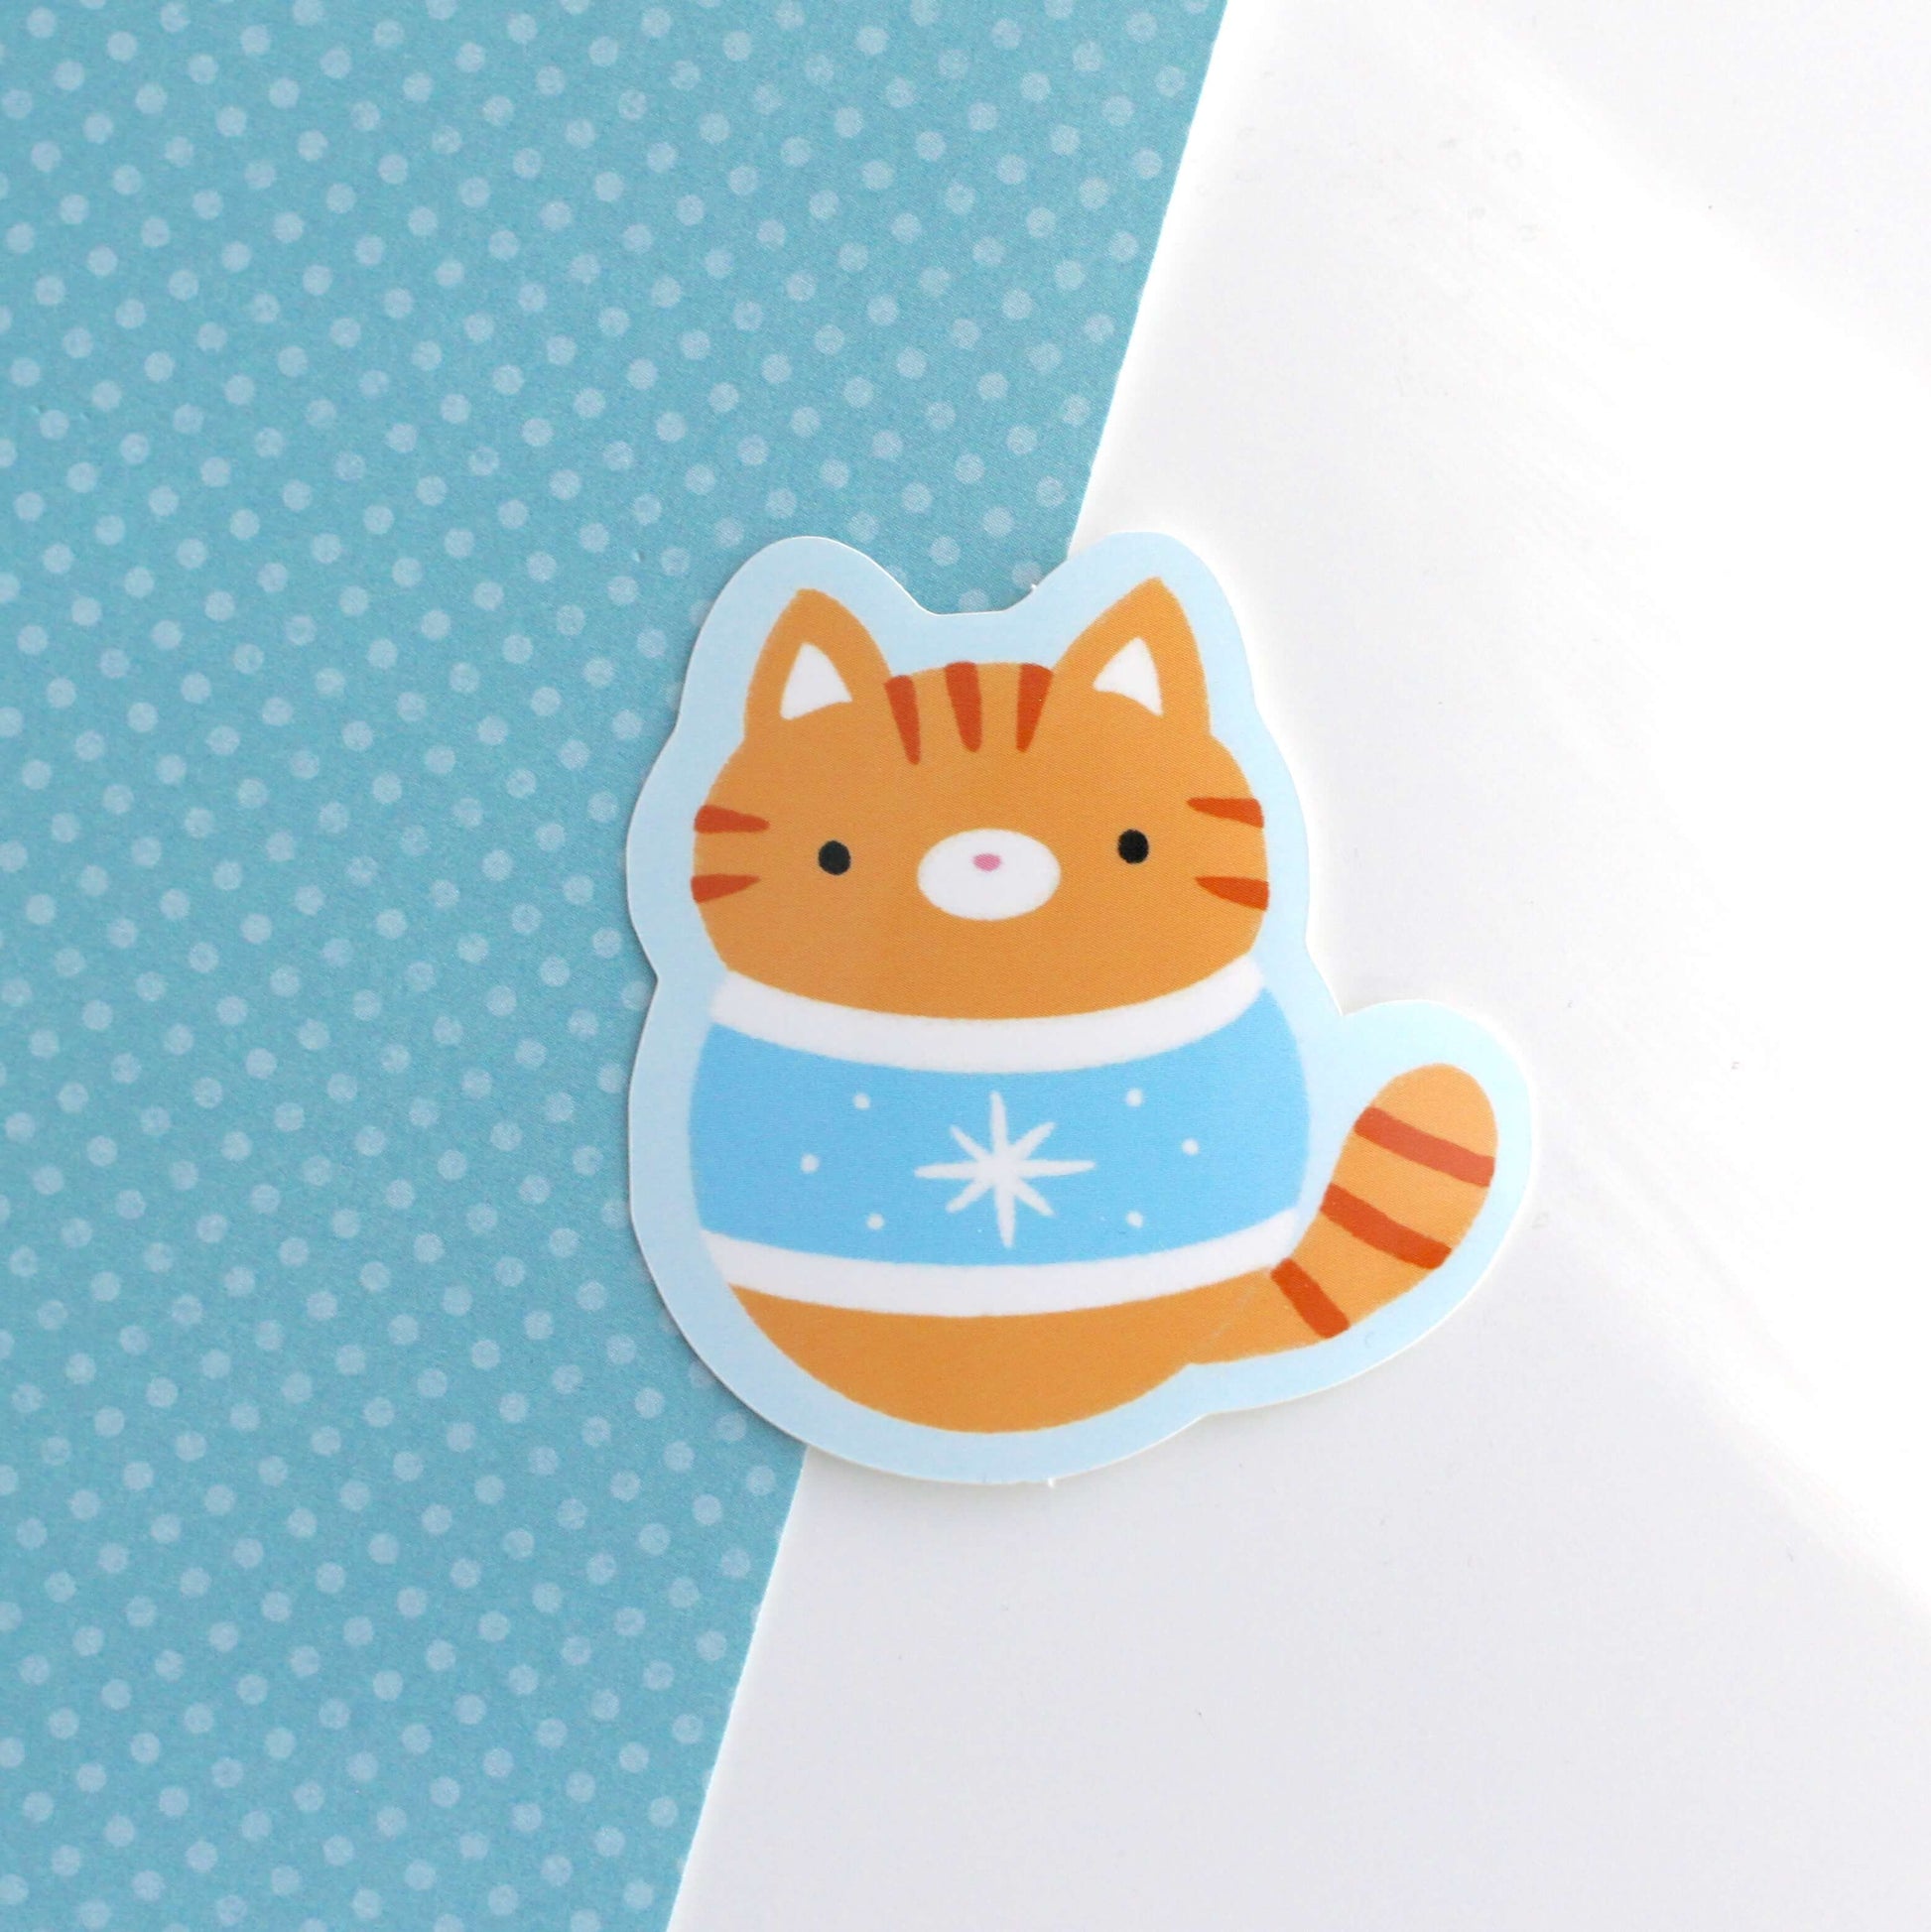 Christmas Sweater Cats Glossy Vinyl Stickers - Orange and Grey Tabby Cat Decals: Orange Cat Wearing Blue Sweater